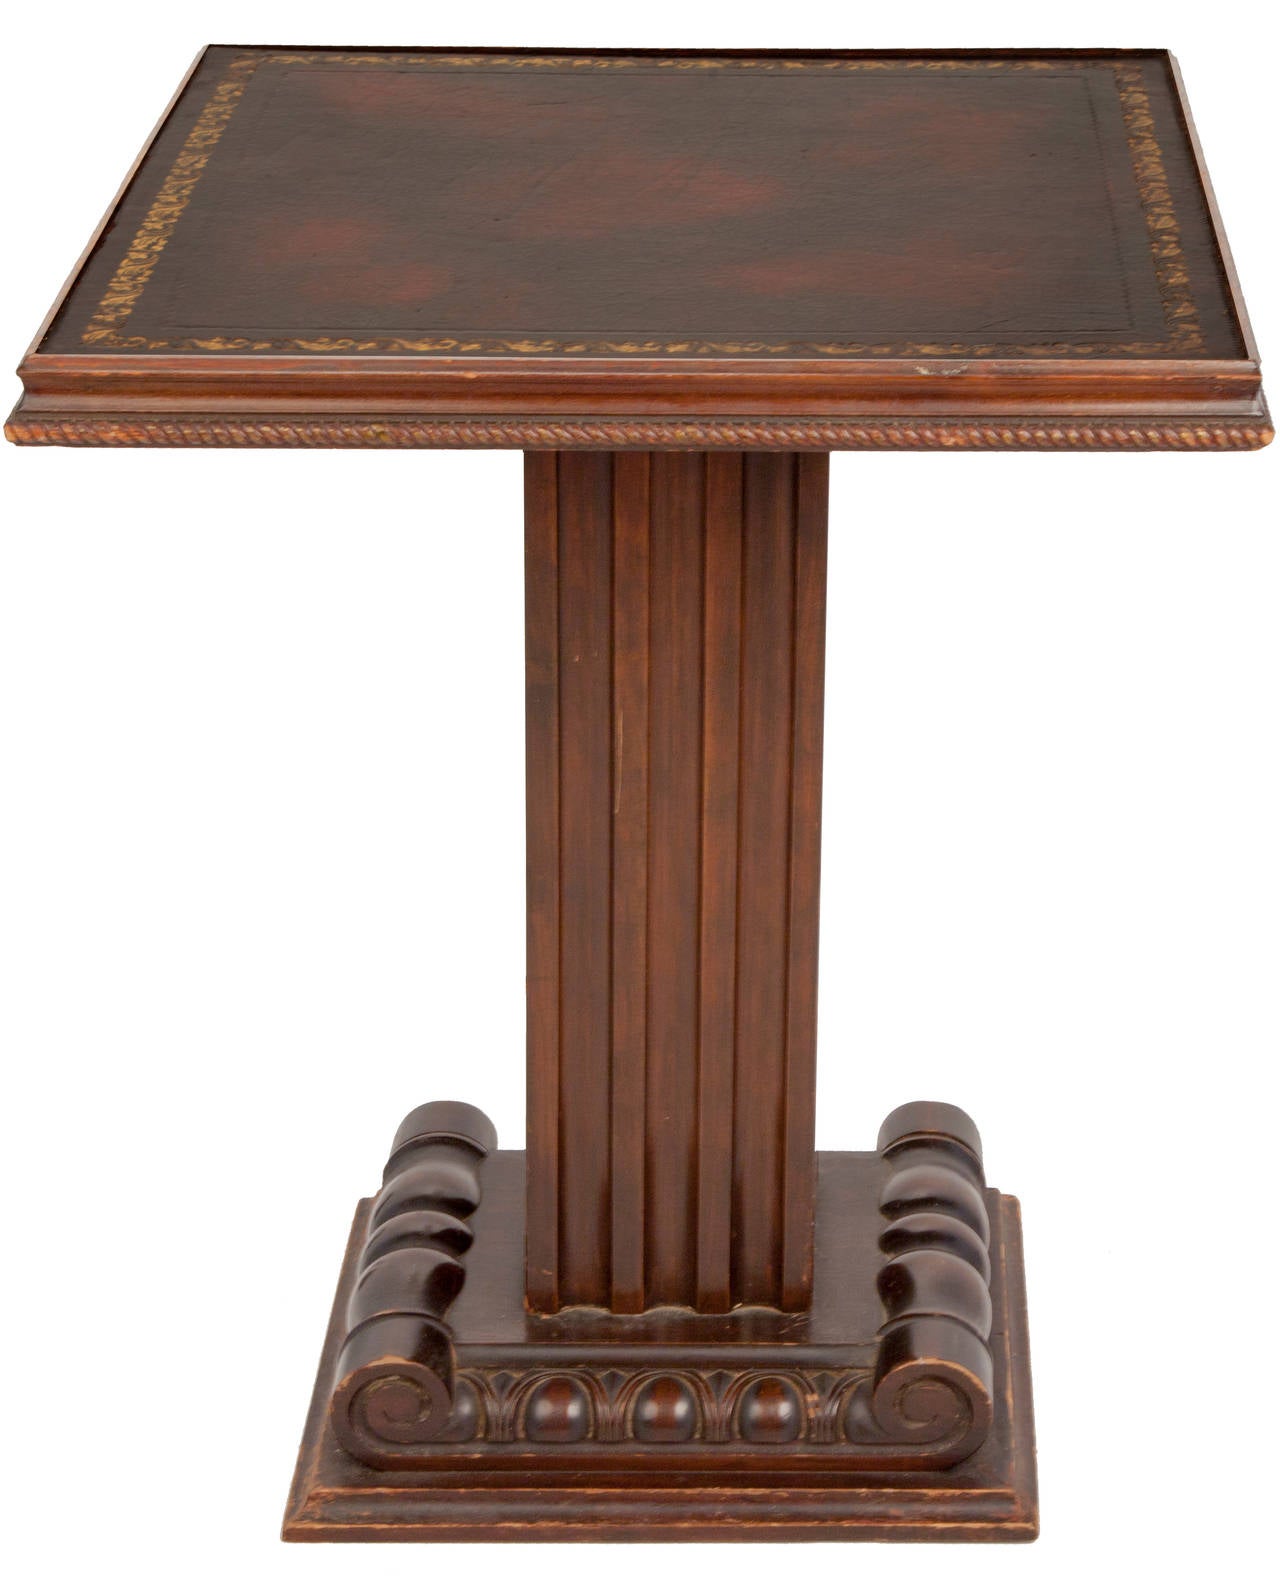 This pair of Grosfield House tables are raised on square bases with carved volutes and egg and dart molding. Square fluted shaft supports a square top with carved rope molding around the outer edge. Nice mottled chestnut colored inset leather tops